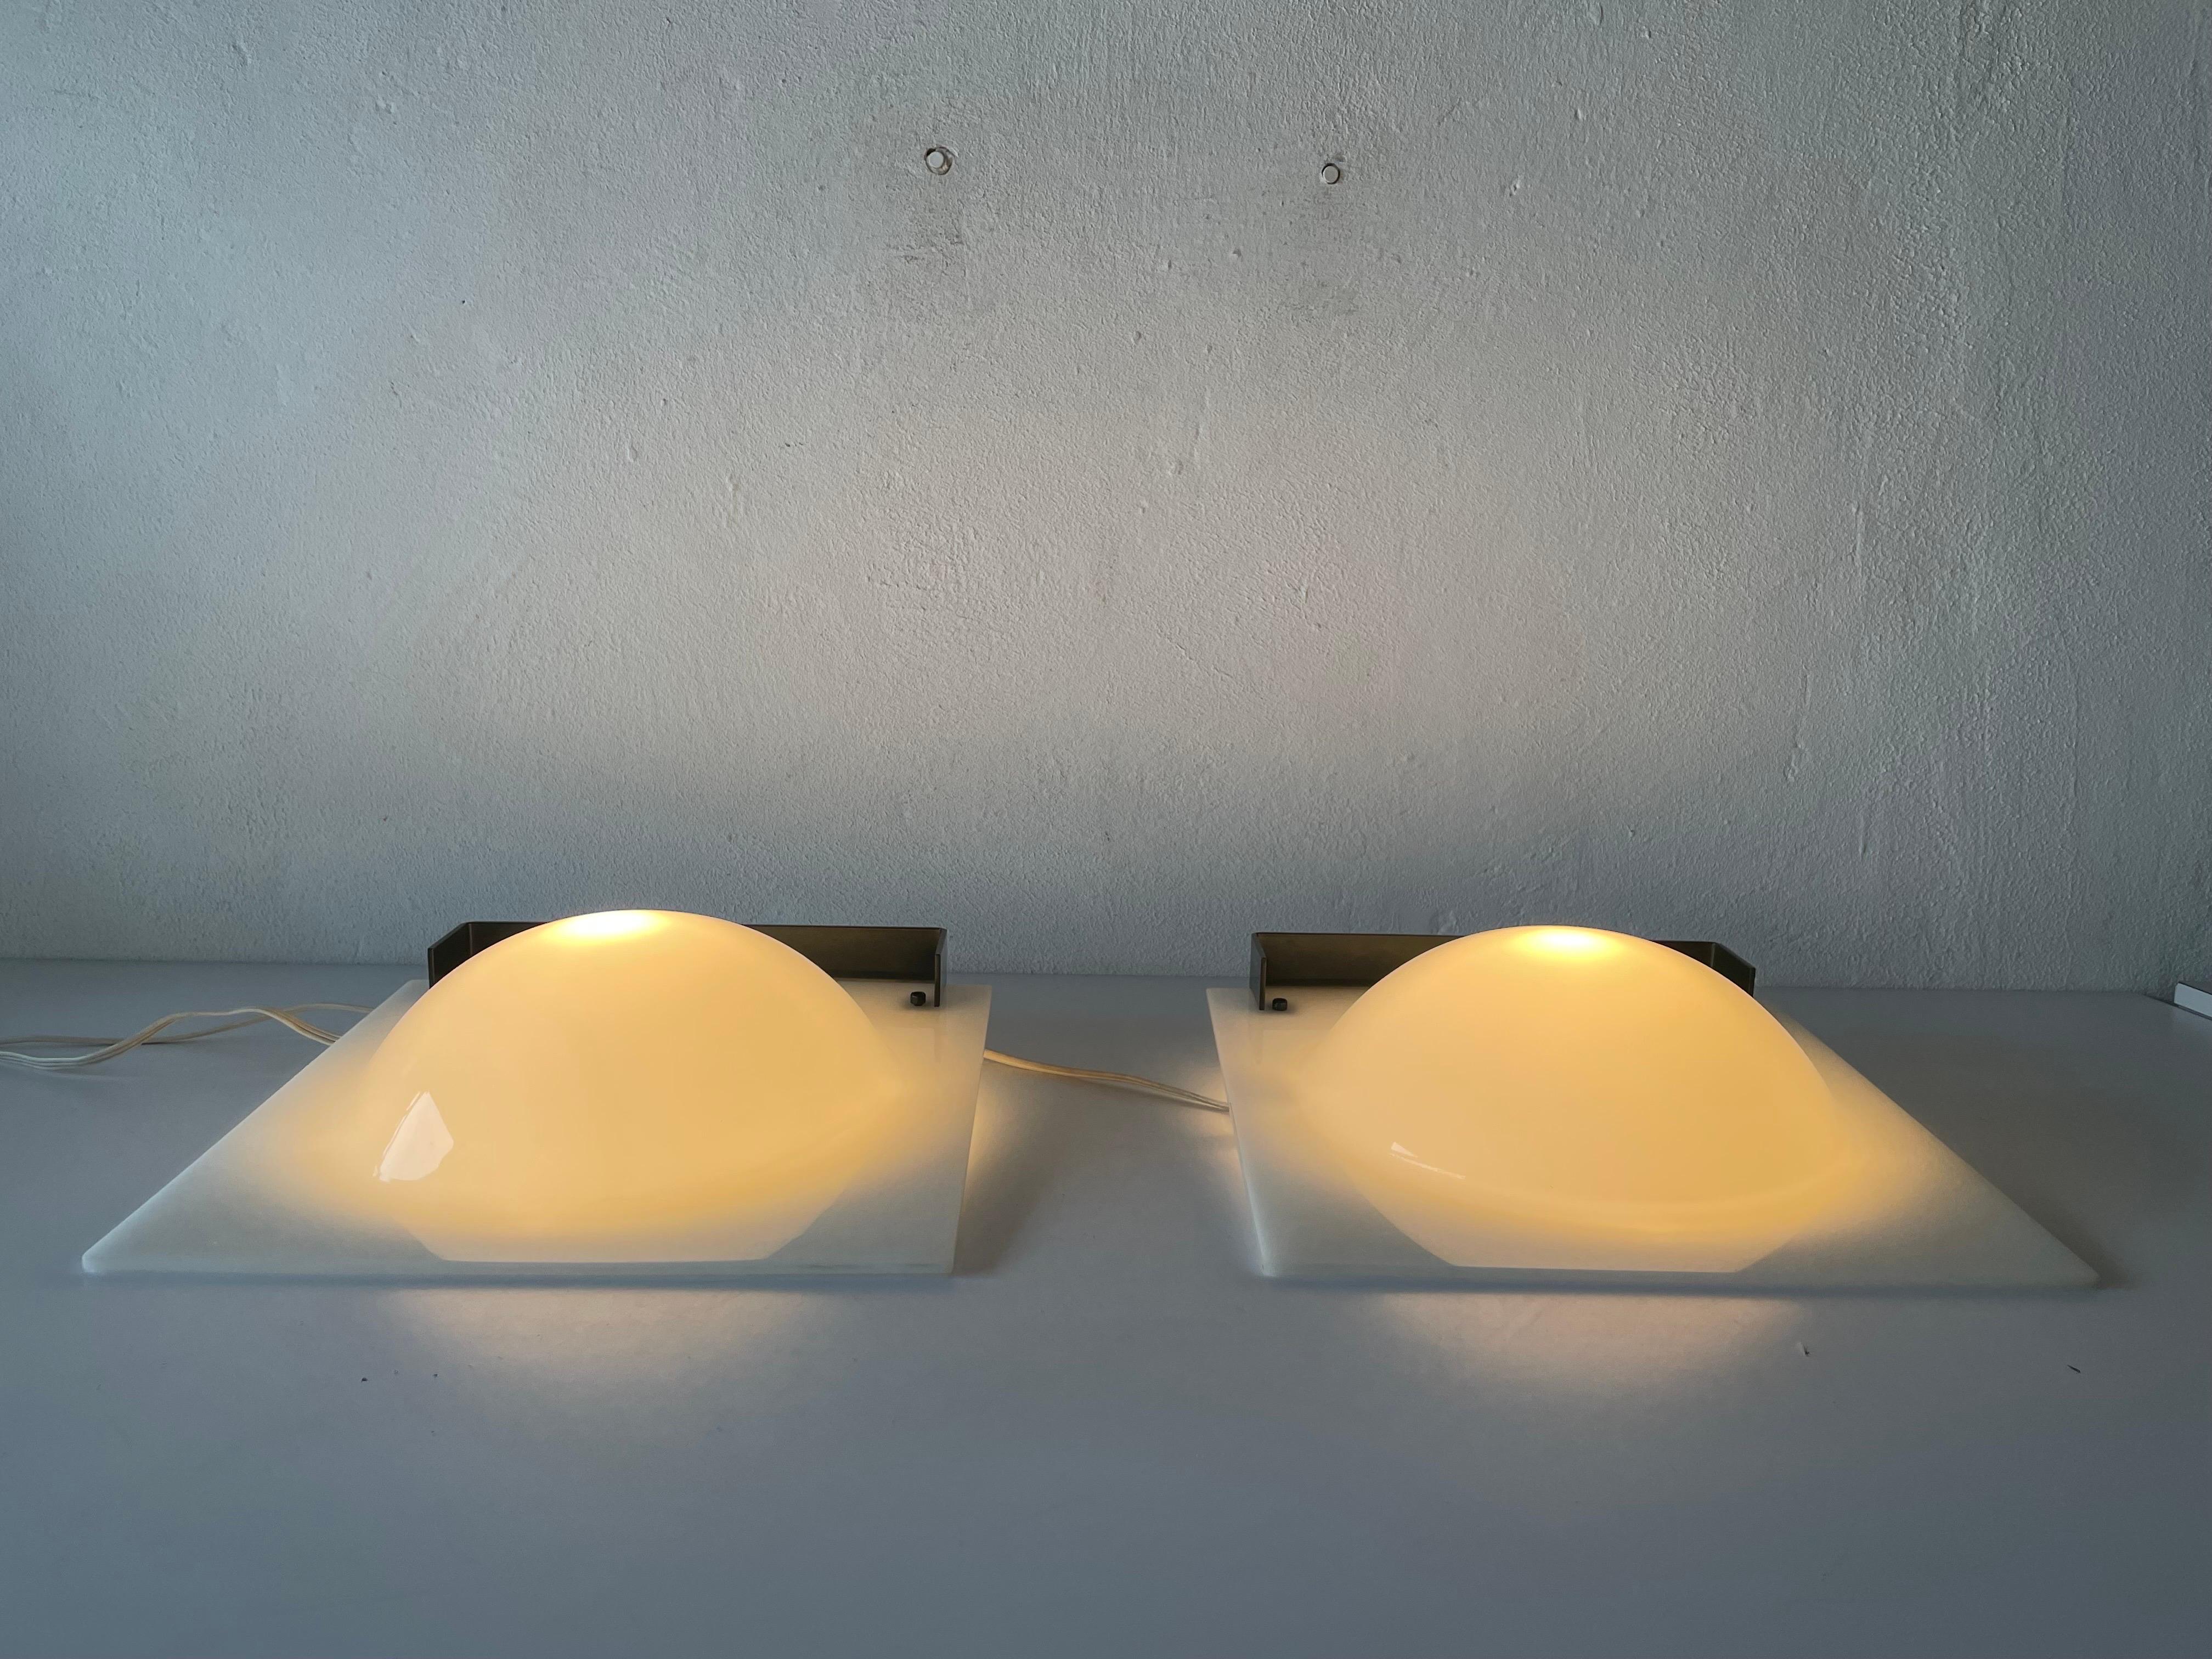 High Quality Plexiglass Bubble Design Pair of Wall Lamps, 1960s, Italy For Sale 6